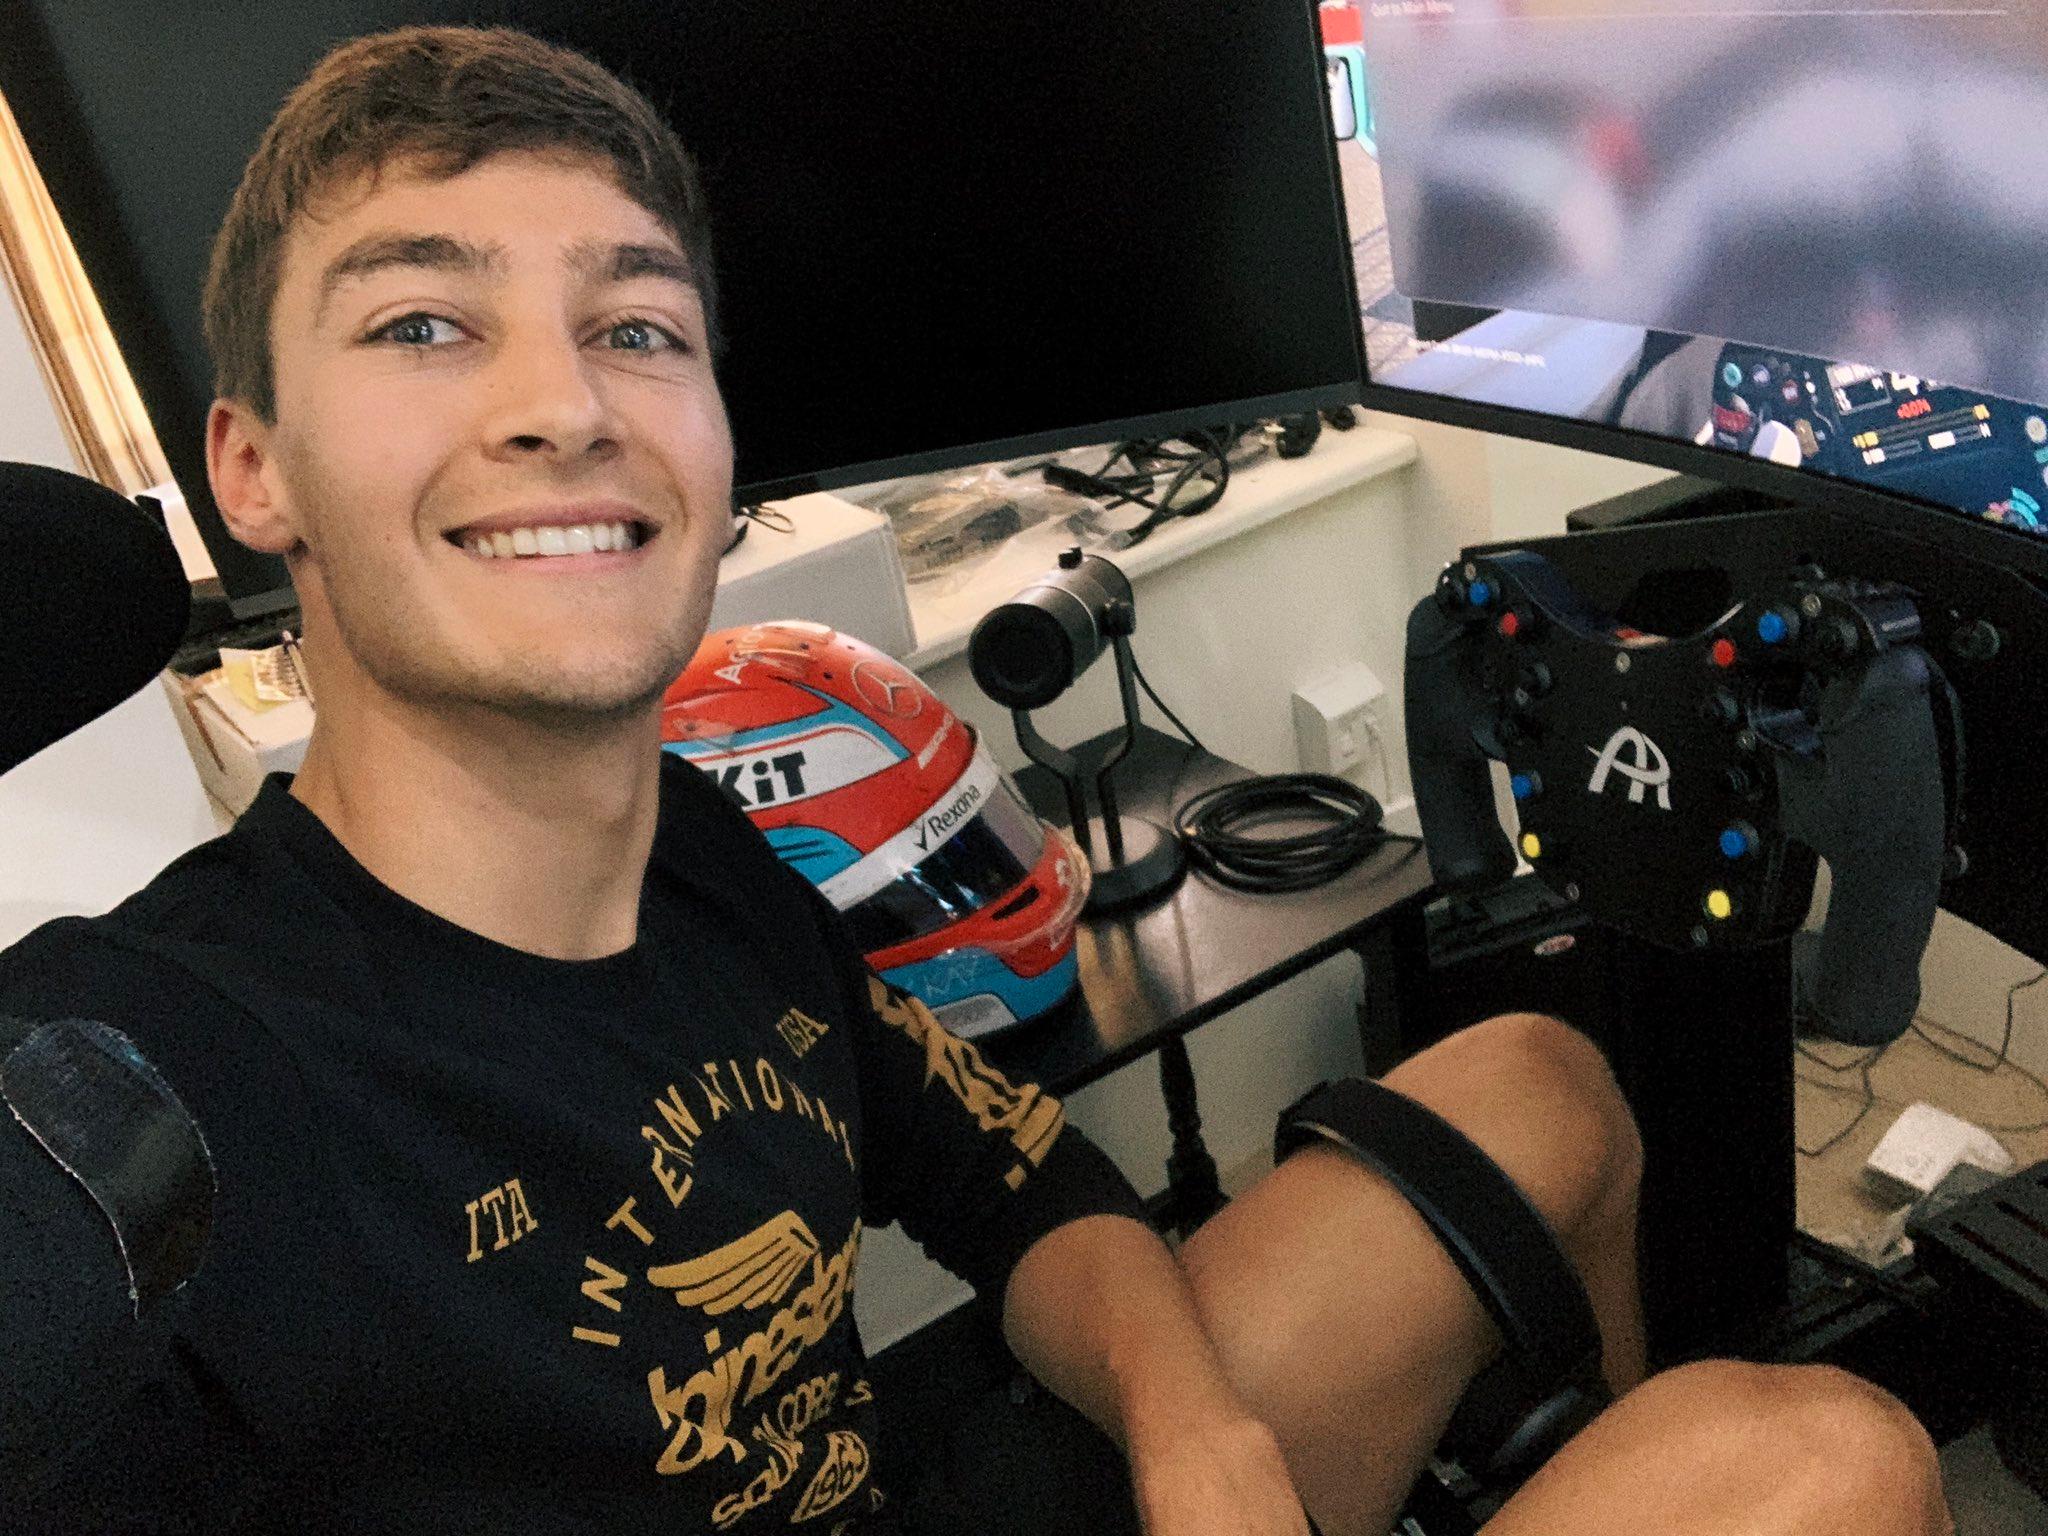 Russell dominated the F1 esports scene after joining, winning four straight virtual races in a row.